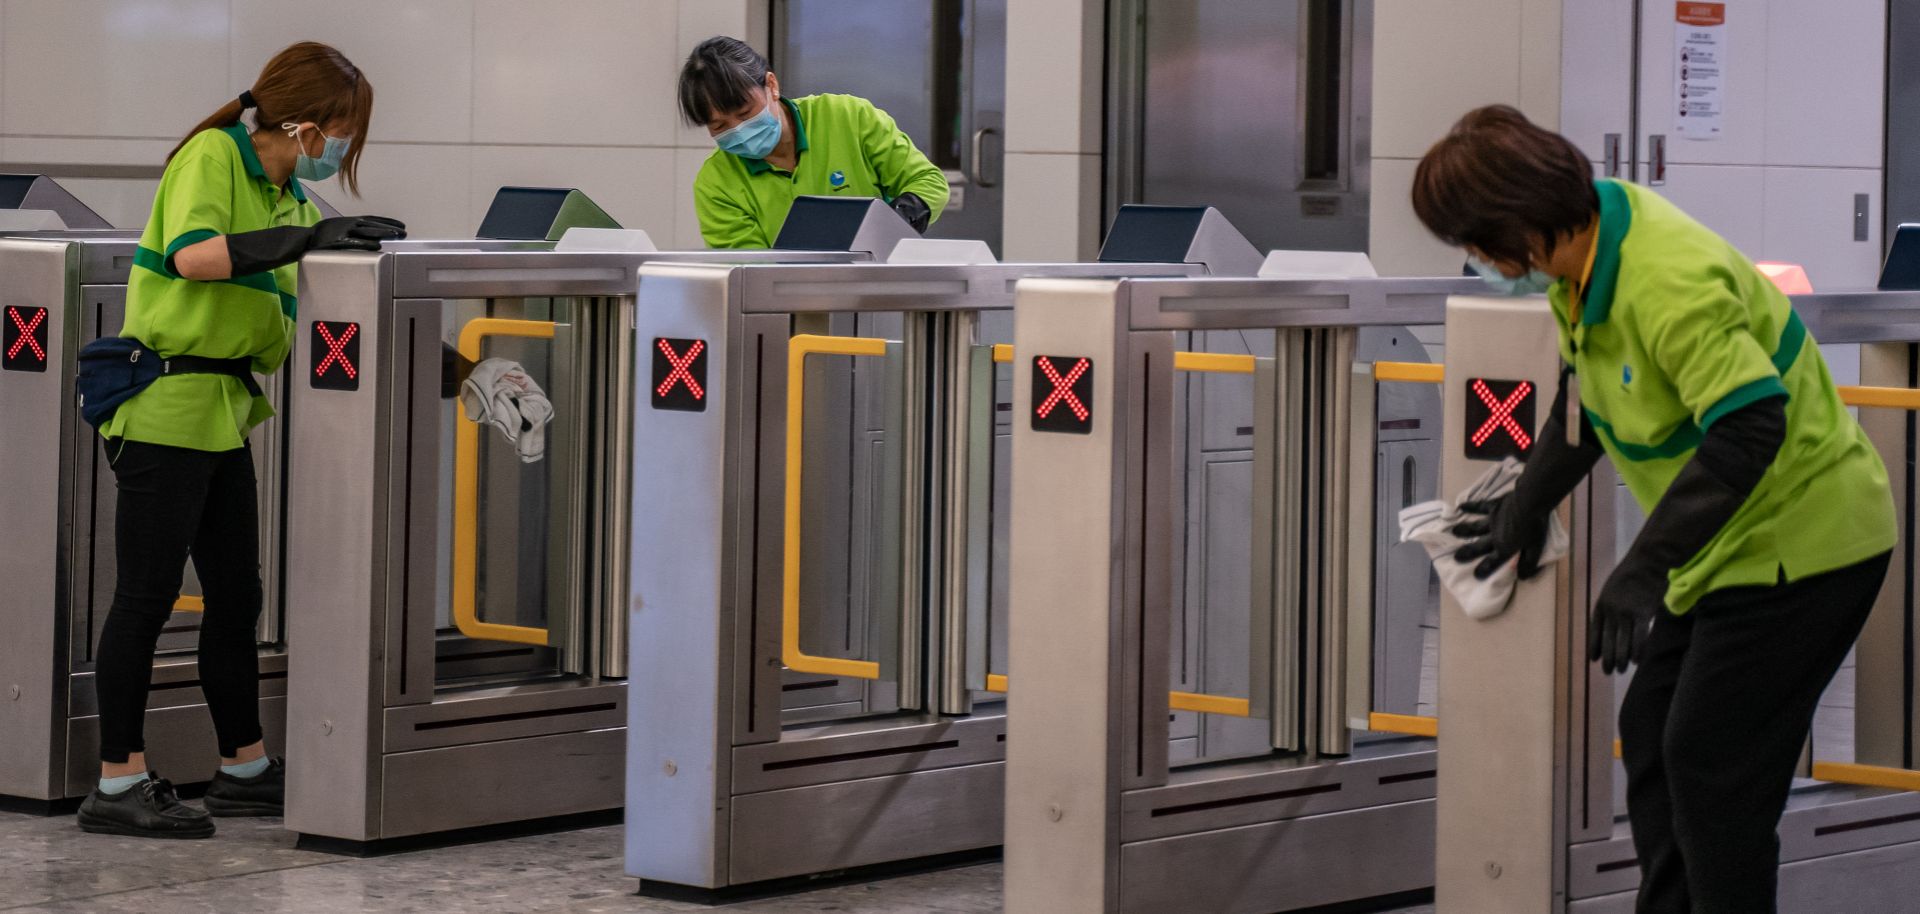 Cleaners wearing protective masks clean the gate in the arrival hall at a Hong Kong rail station on Jan. 29, 2020.